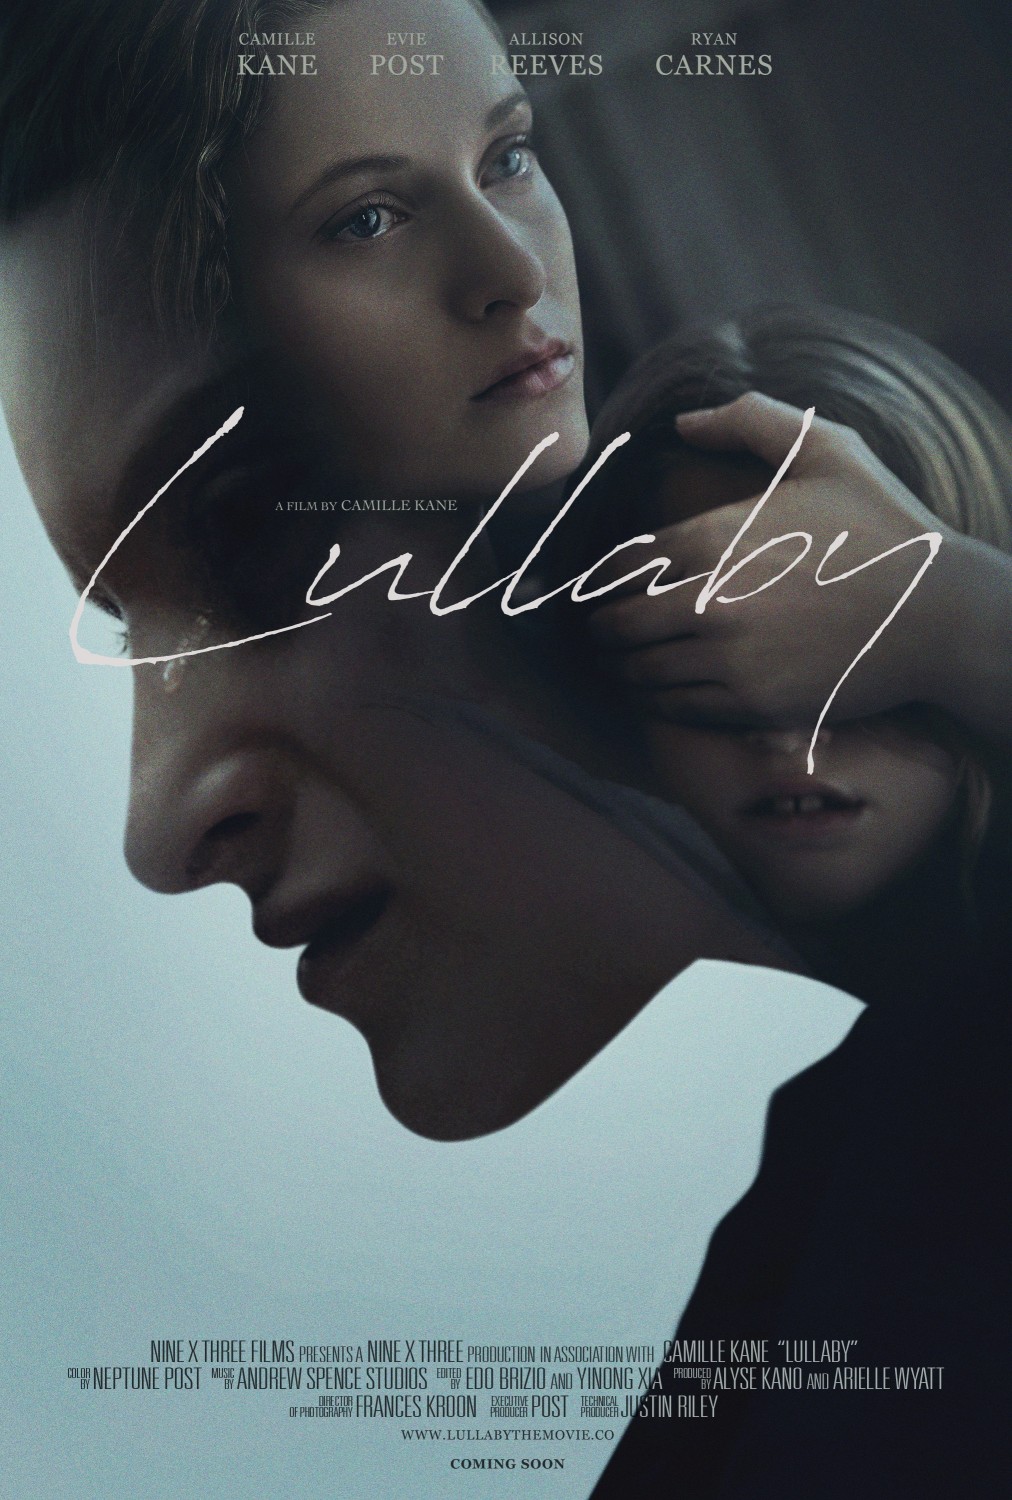 Extra Large Movie Poster Image for Lullaby